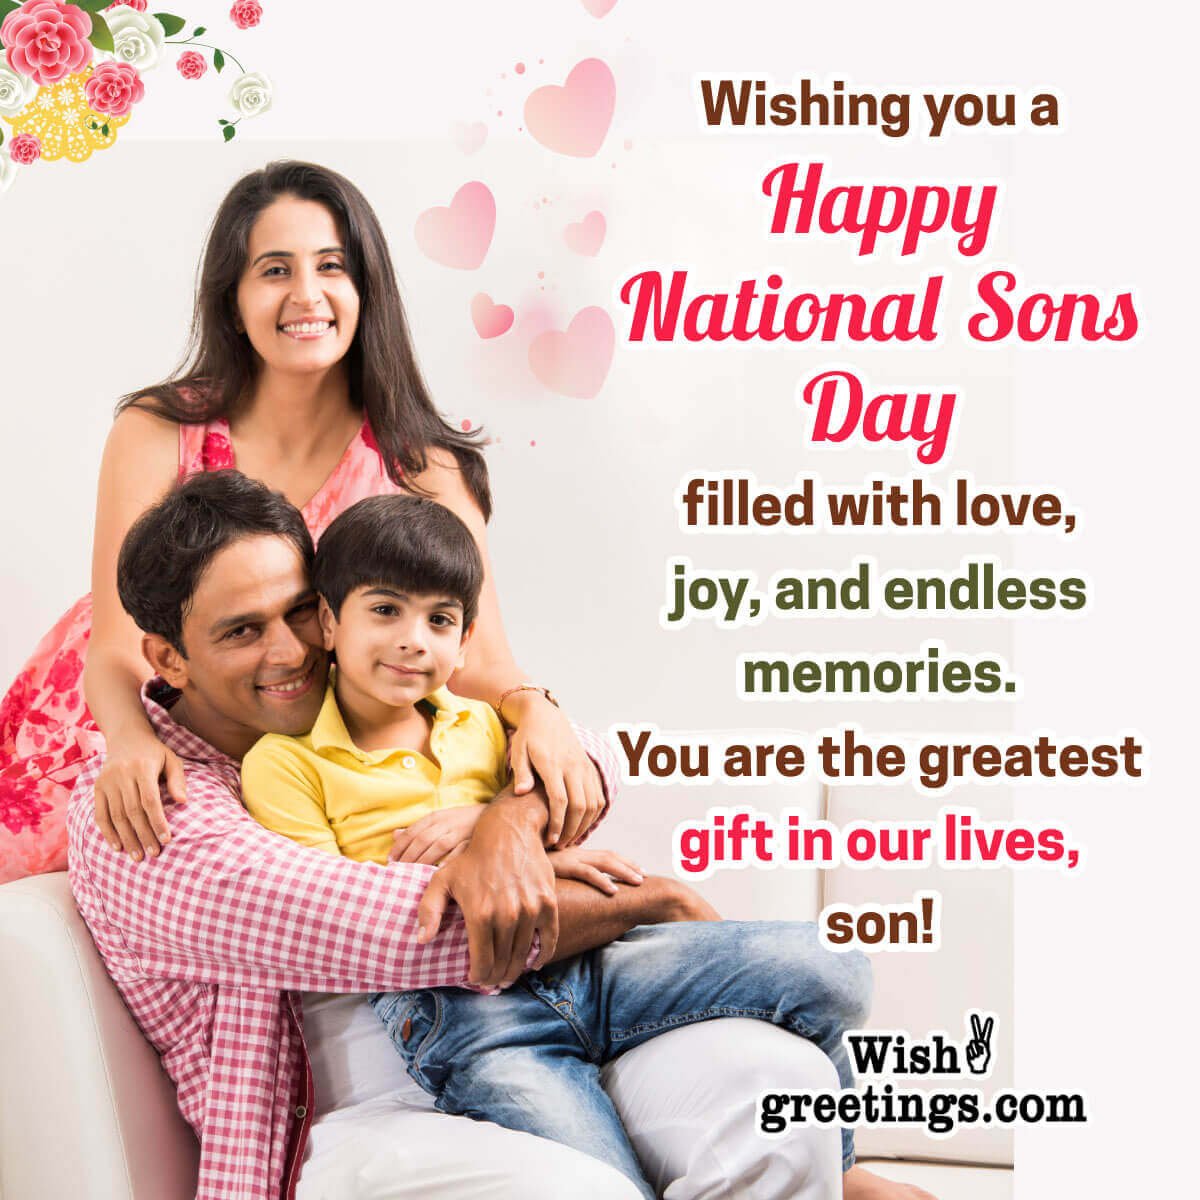 Son’s Day Wishes Messages